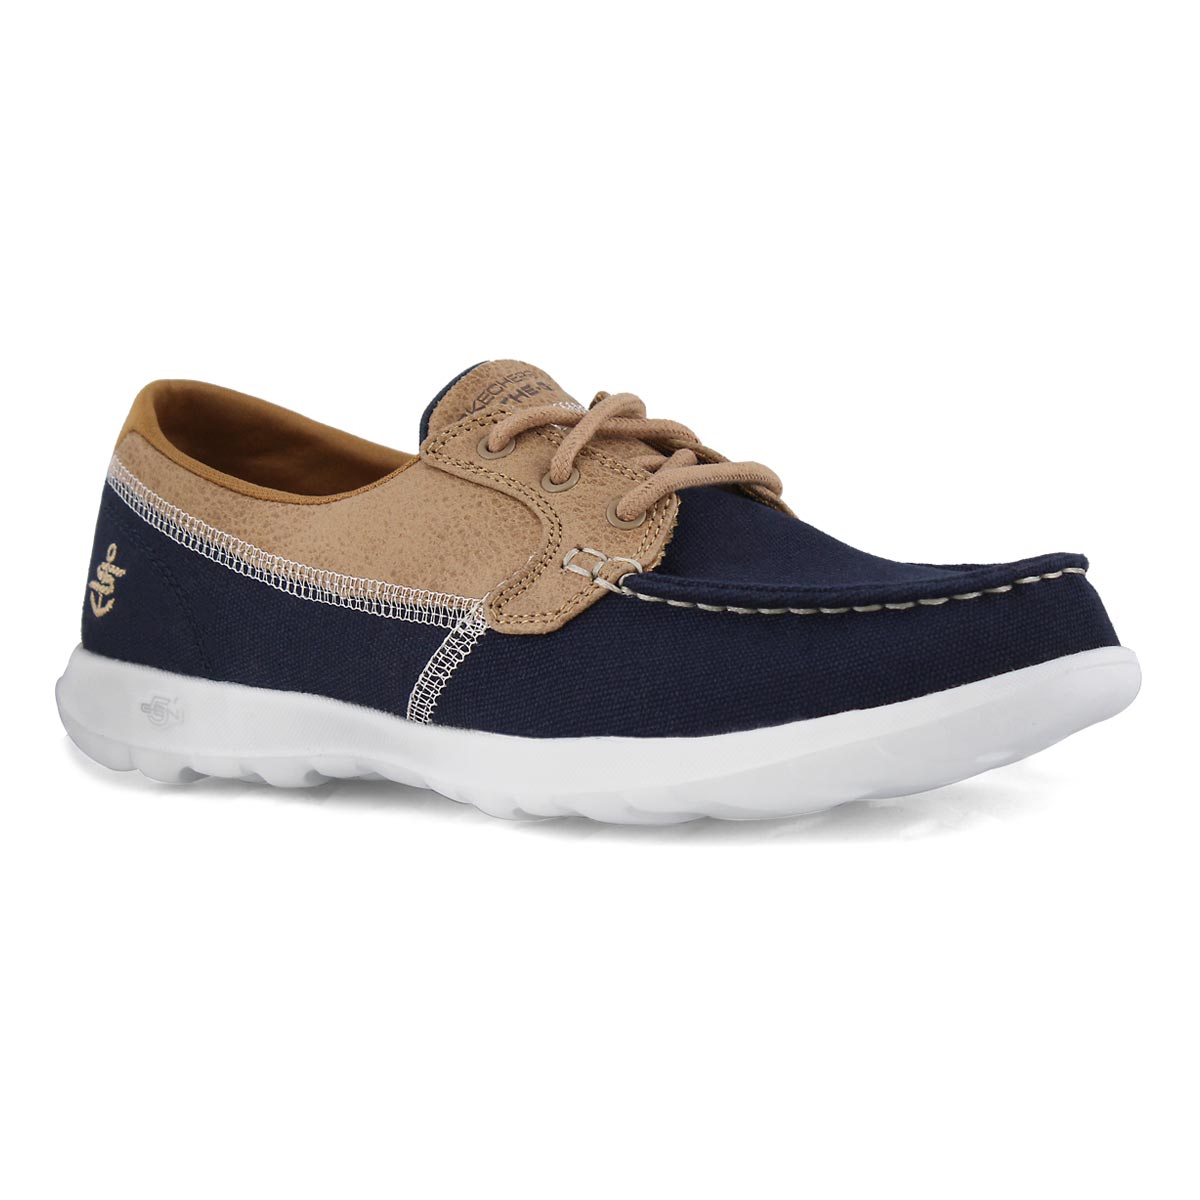 skechers goga max boat shoes Sale,up to 